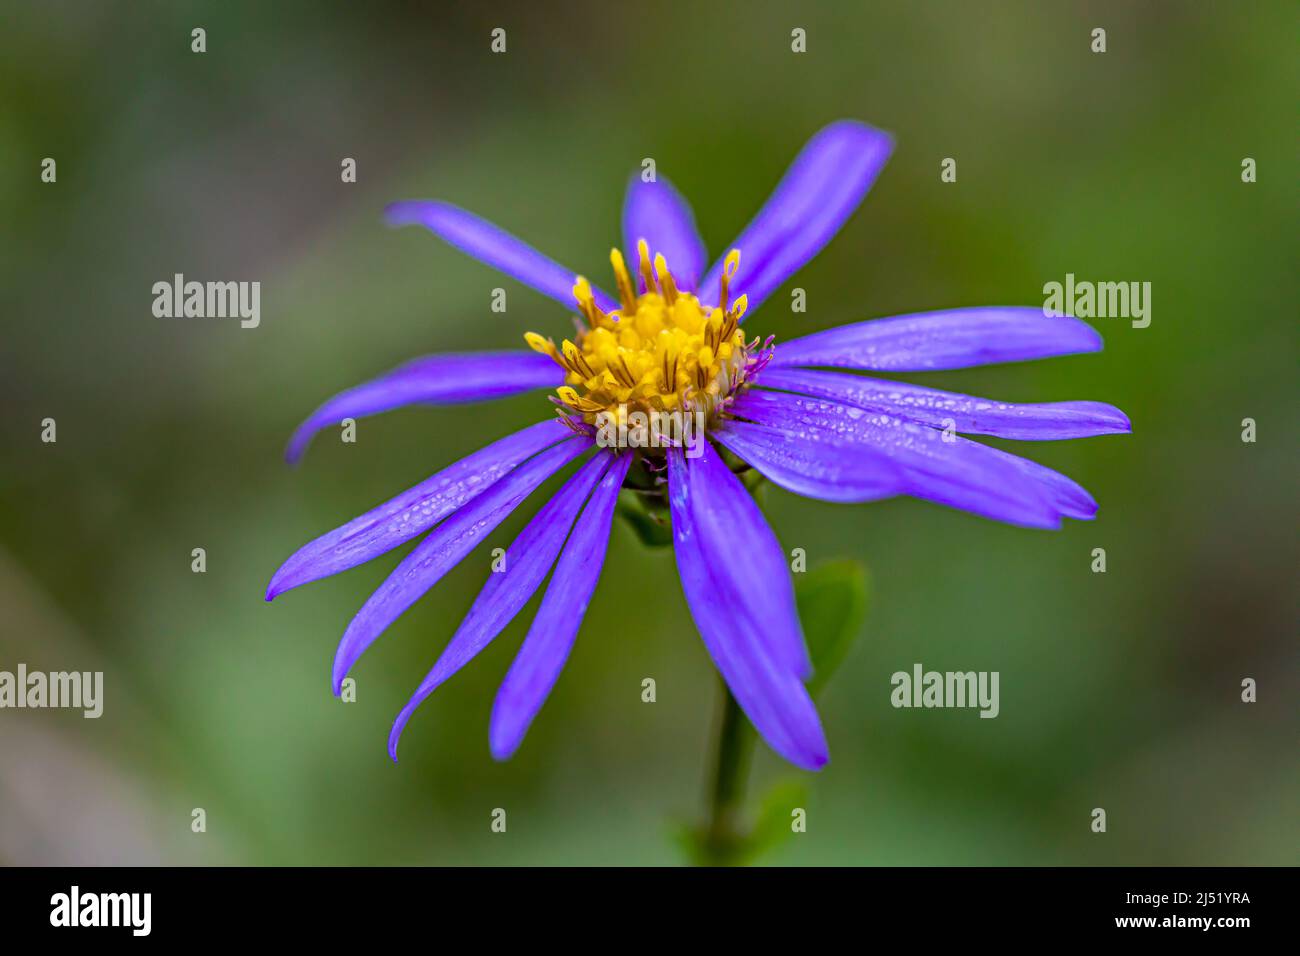 Aster amellus flower growing in mountains, close up shoot Stock Photo